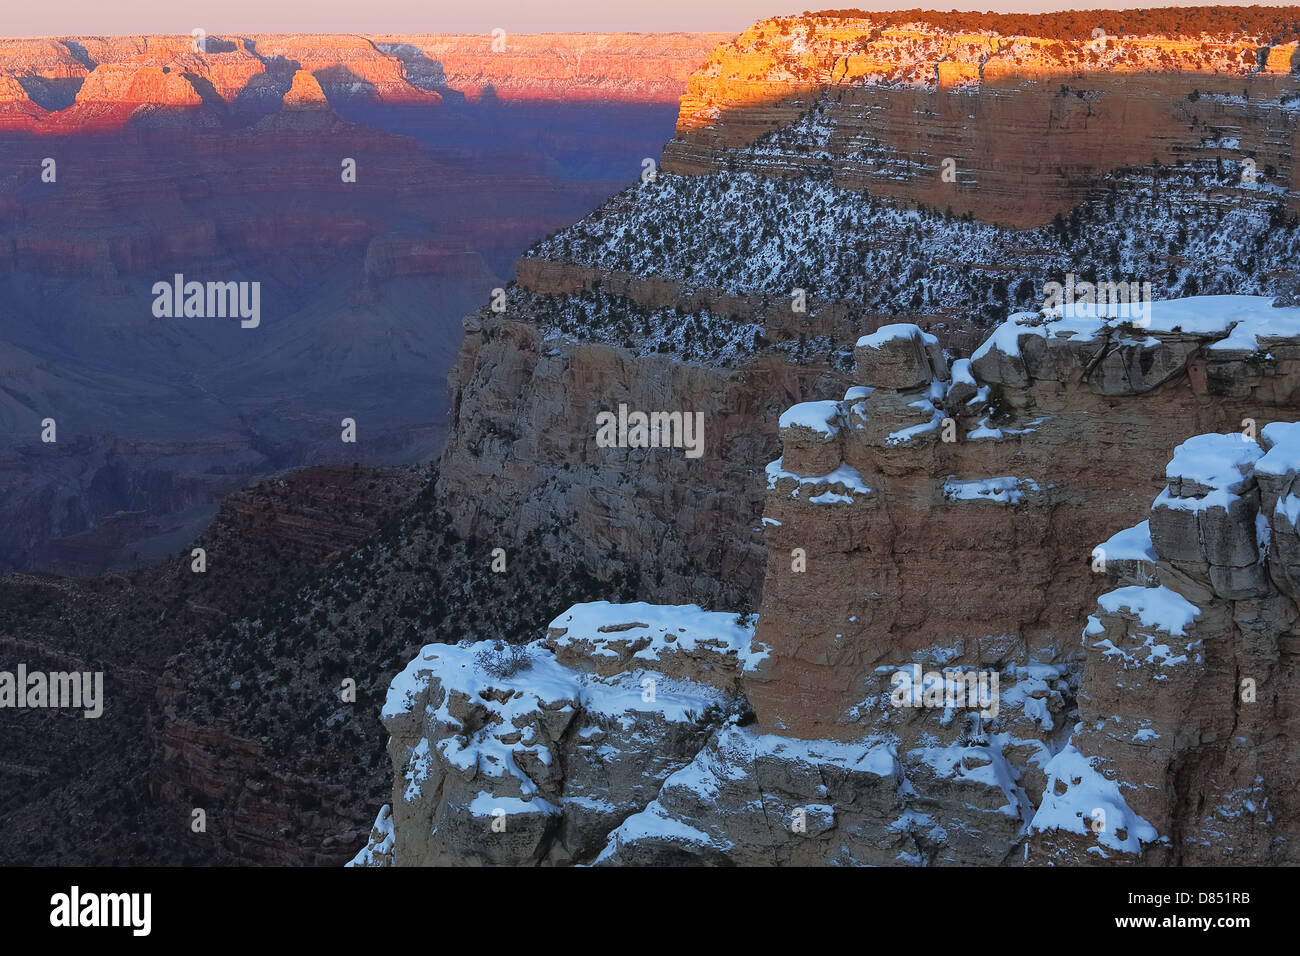 The beautiful South rim of the Grand Canyon, in the Southwest state of Arizona, U.S.A. Stock Photo